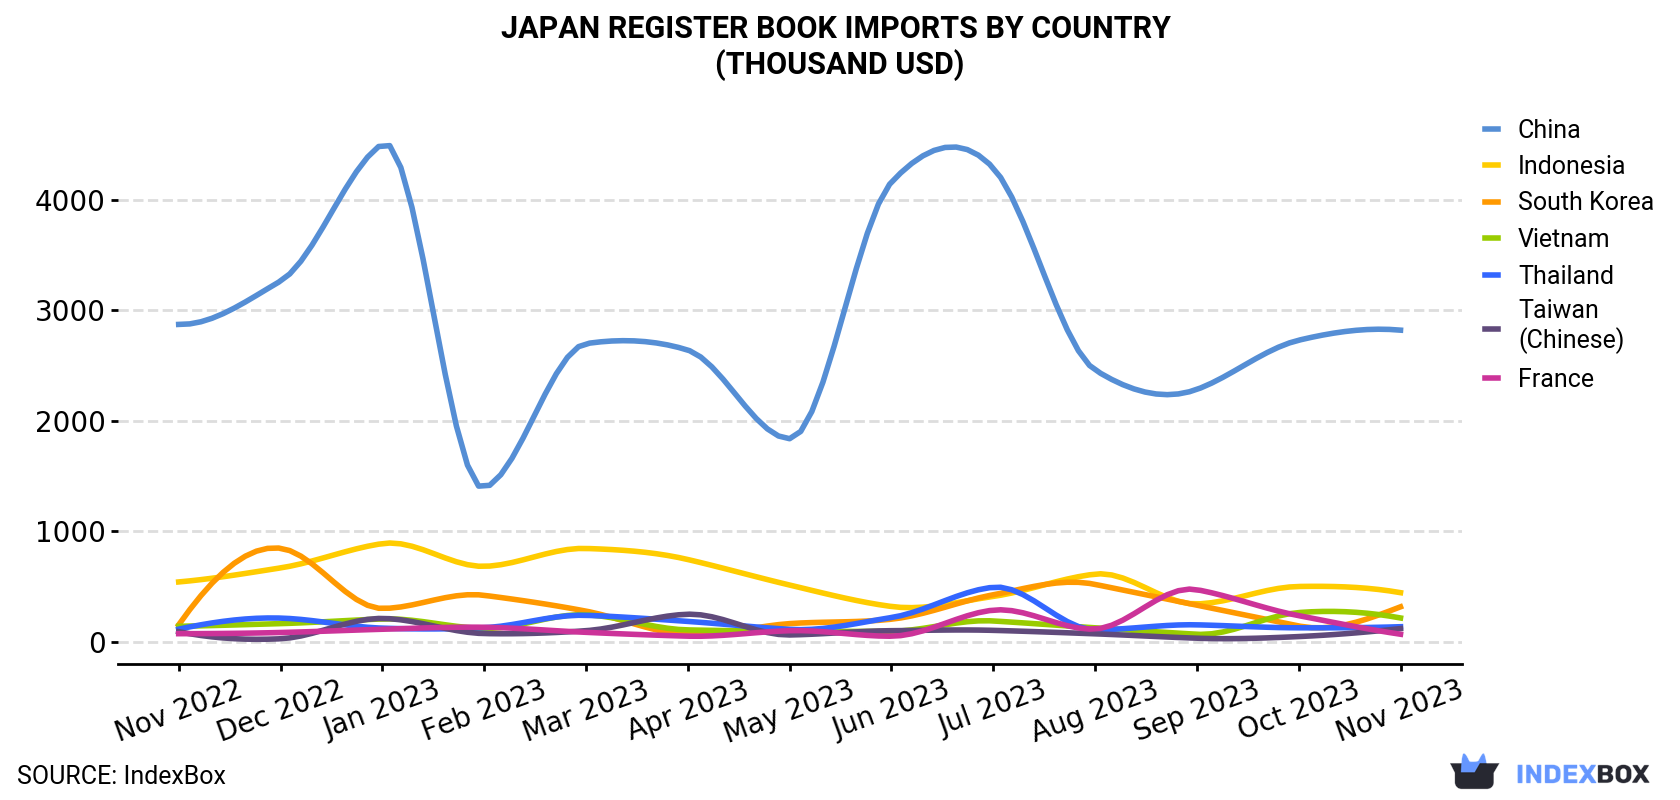 Japan Register Book Imports By Country (Thousand USD)